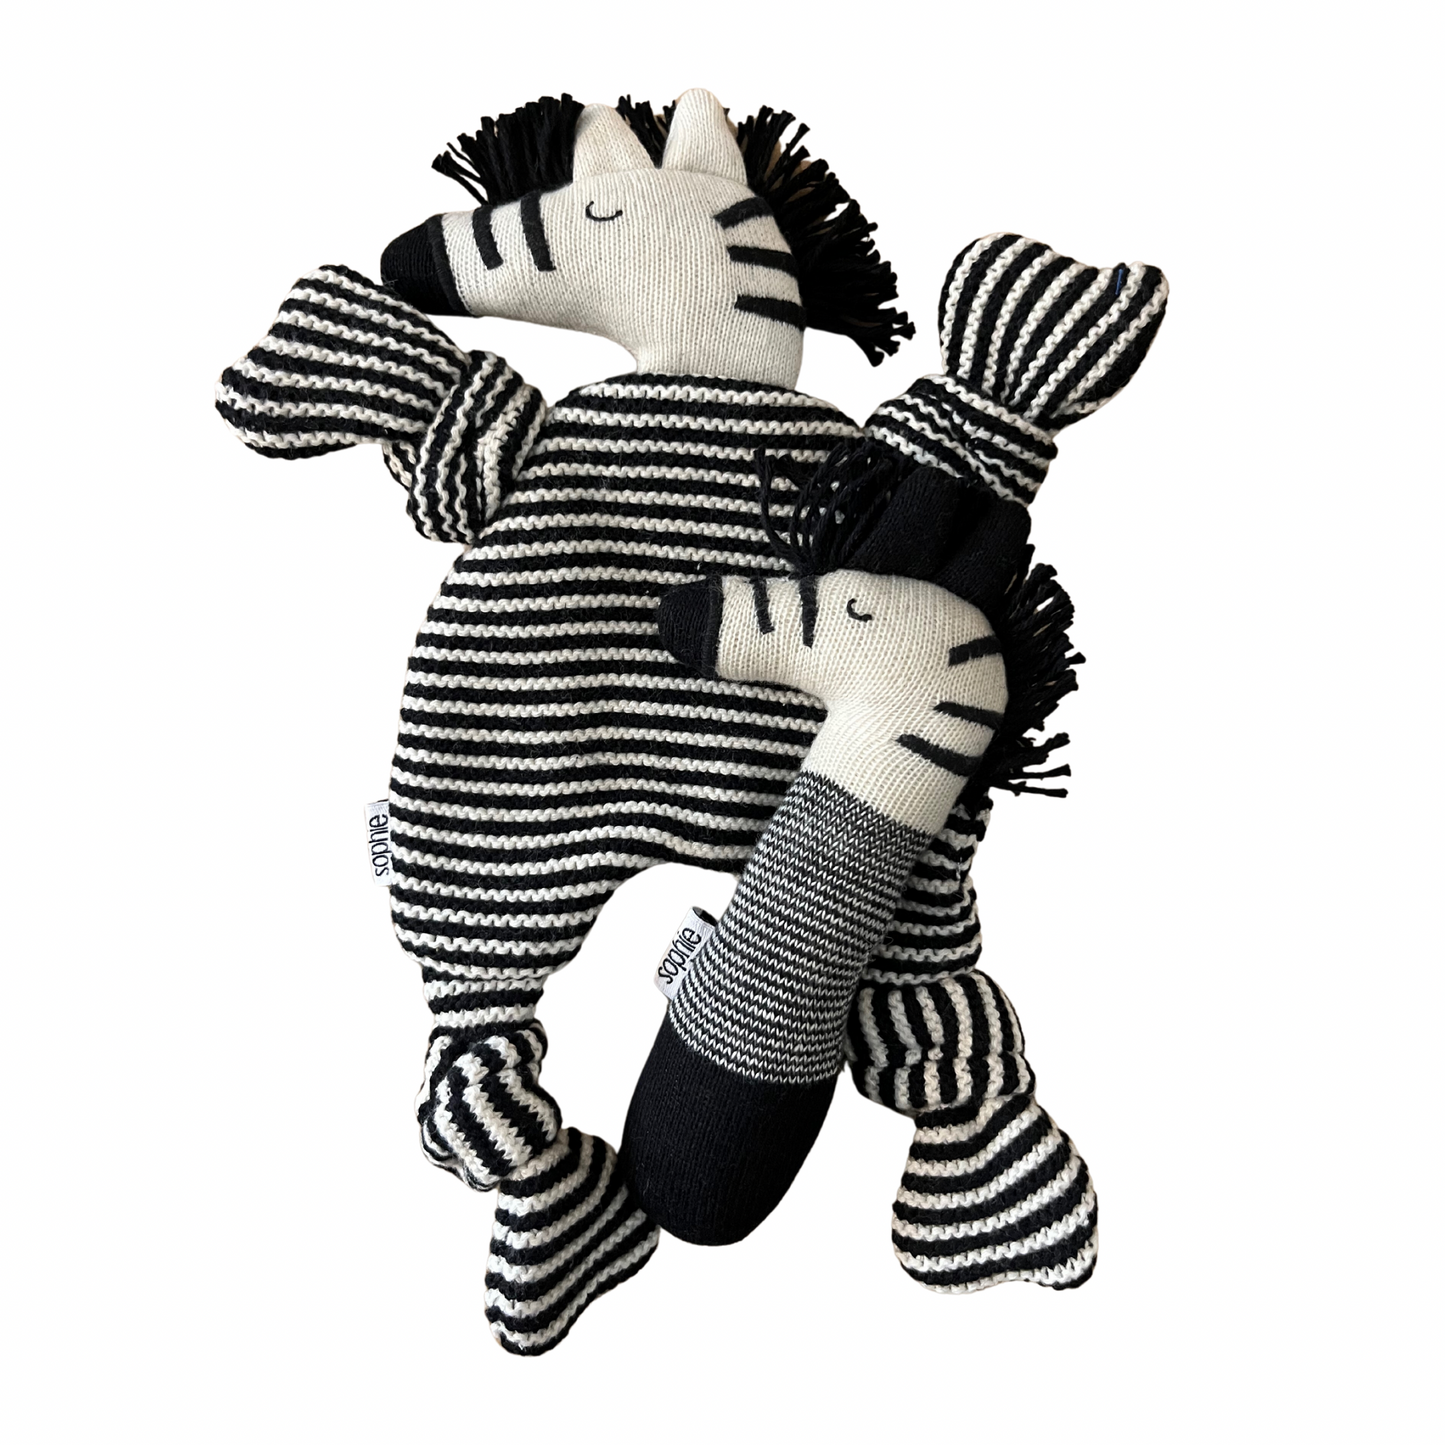 Knitted Baby Rattle - Zebra